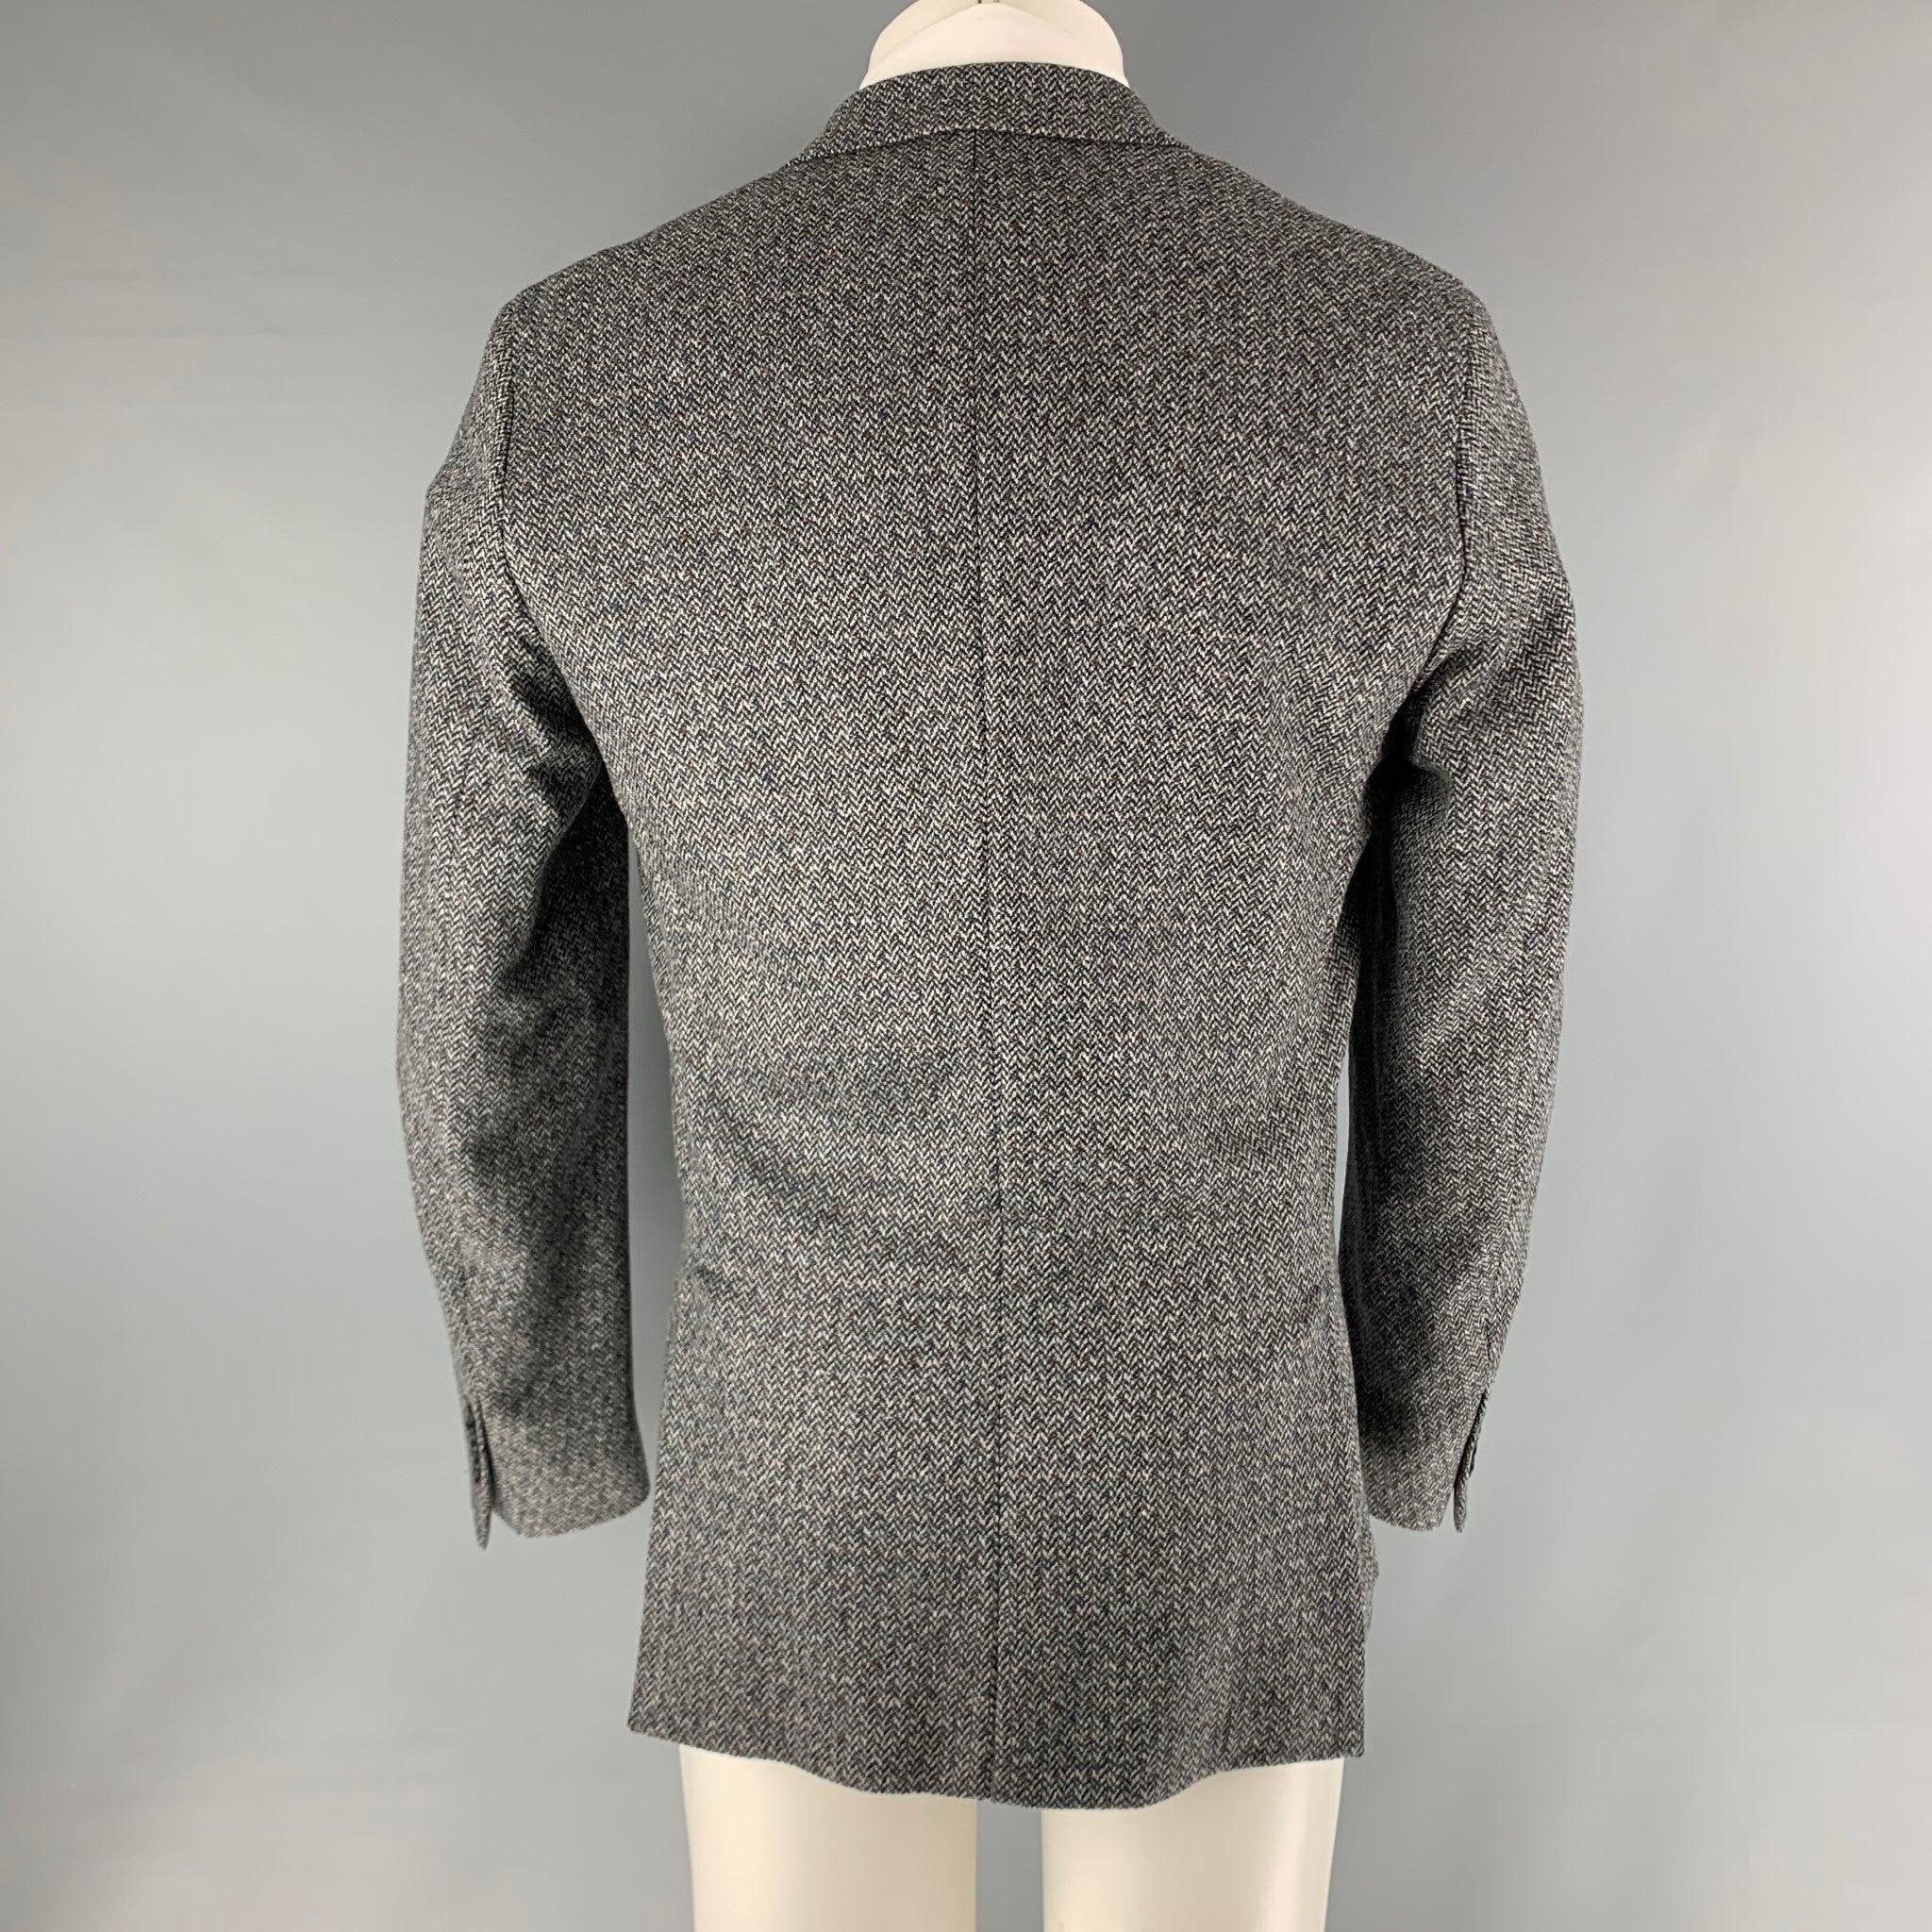 PAUL SMITH Chest Size 40 Grey Black Herringbone Wool / Cashmere Sport Coat In Good Condition For Sale In San Francisco, CA